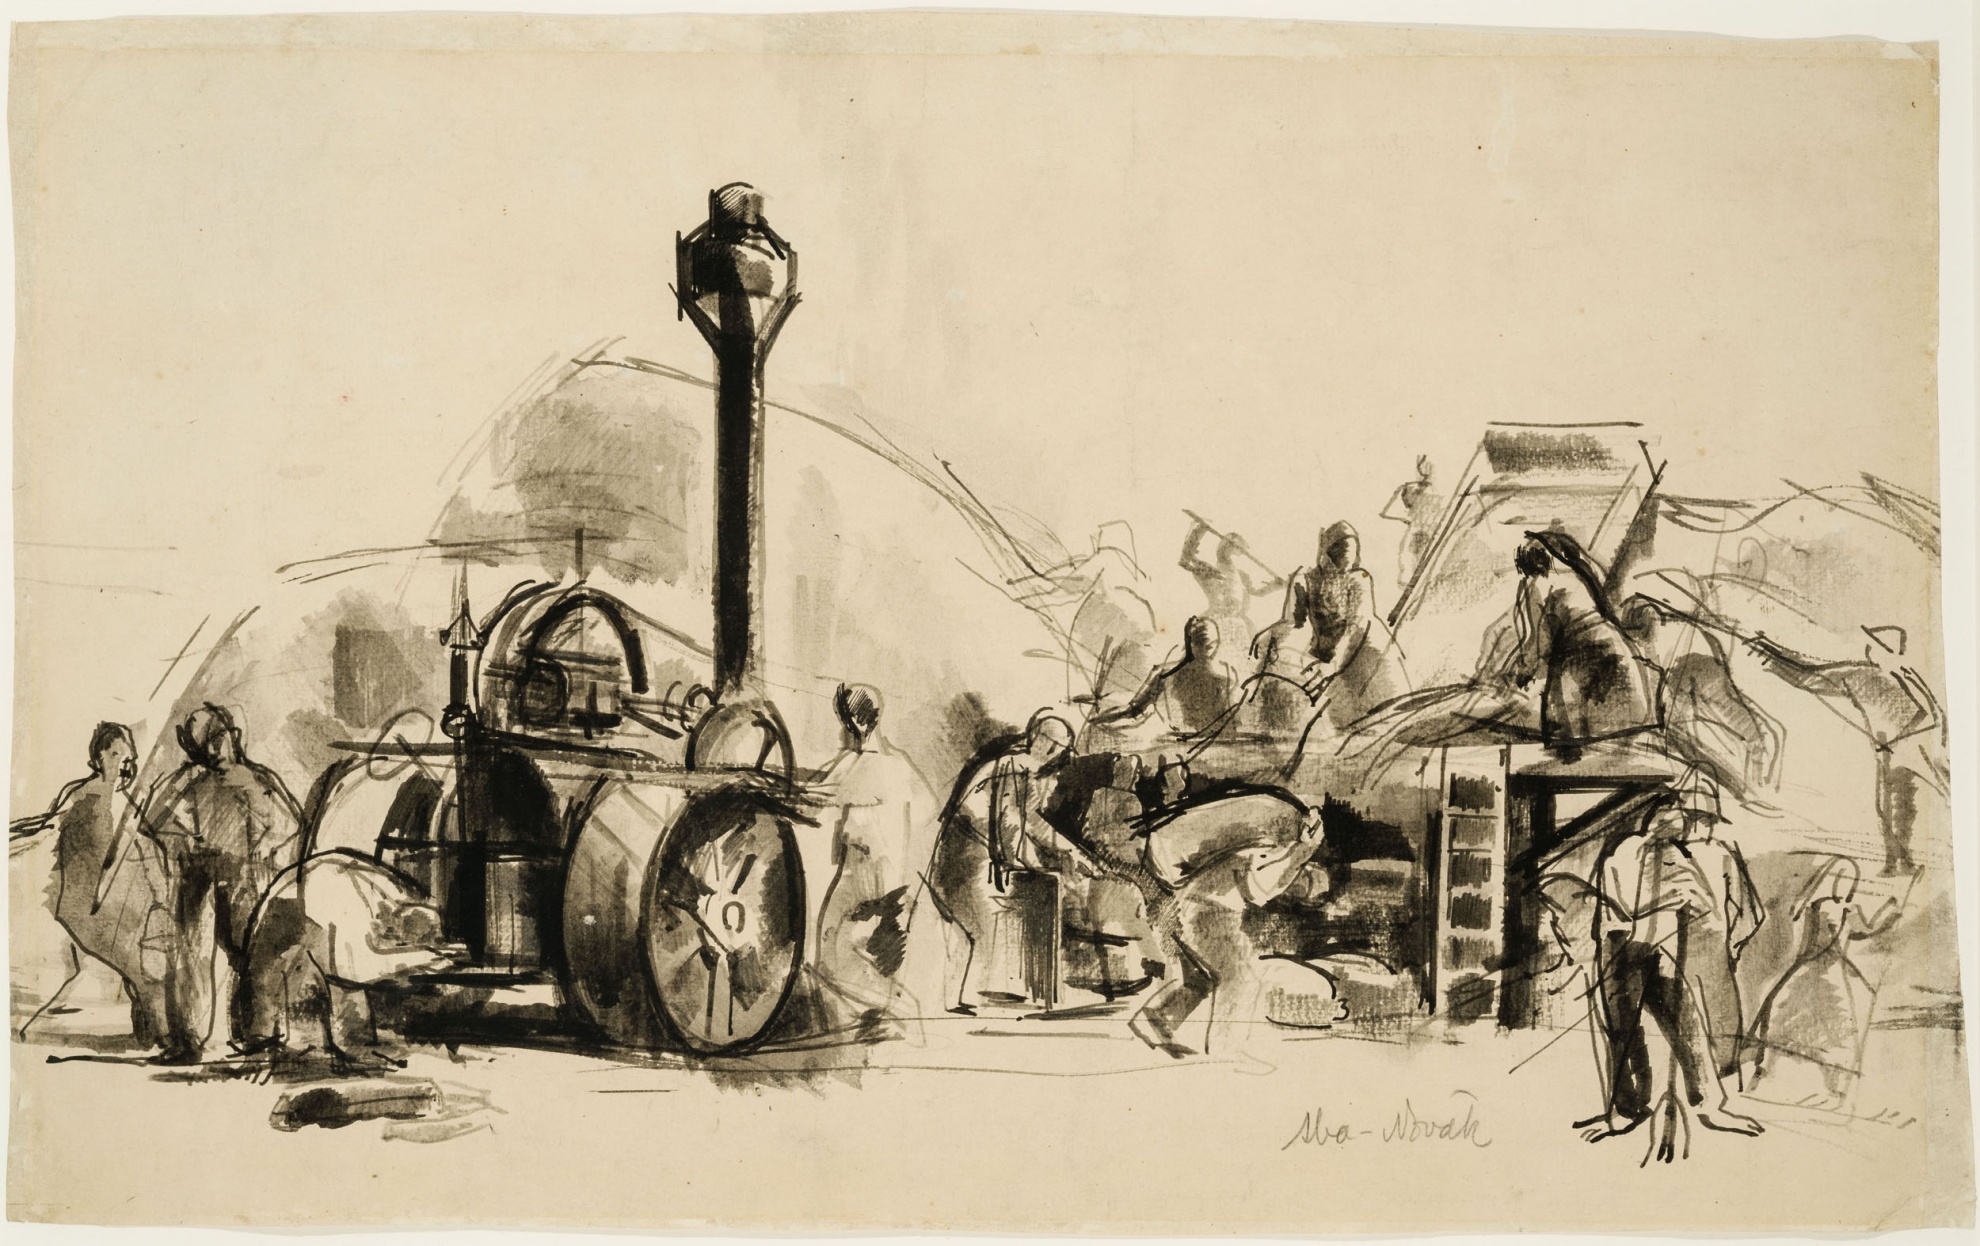 study for Cséplés (Threshing)(known as "Wheat Threshing")
(The Salgo Trust for Education CC BY-NC-SA)